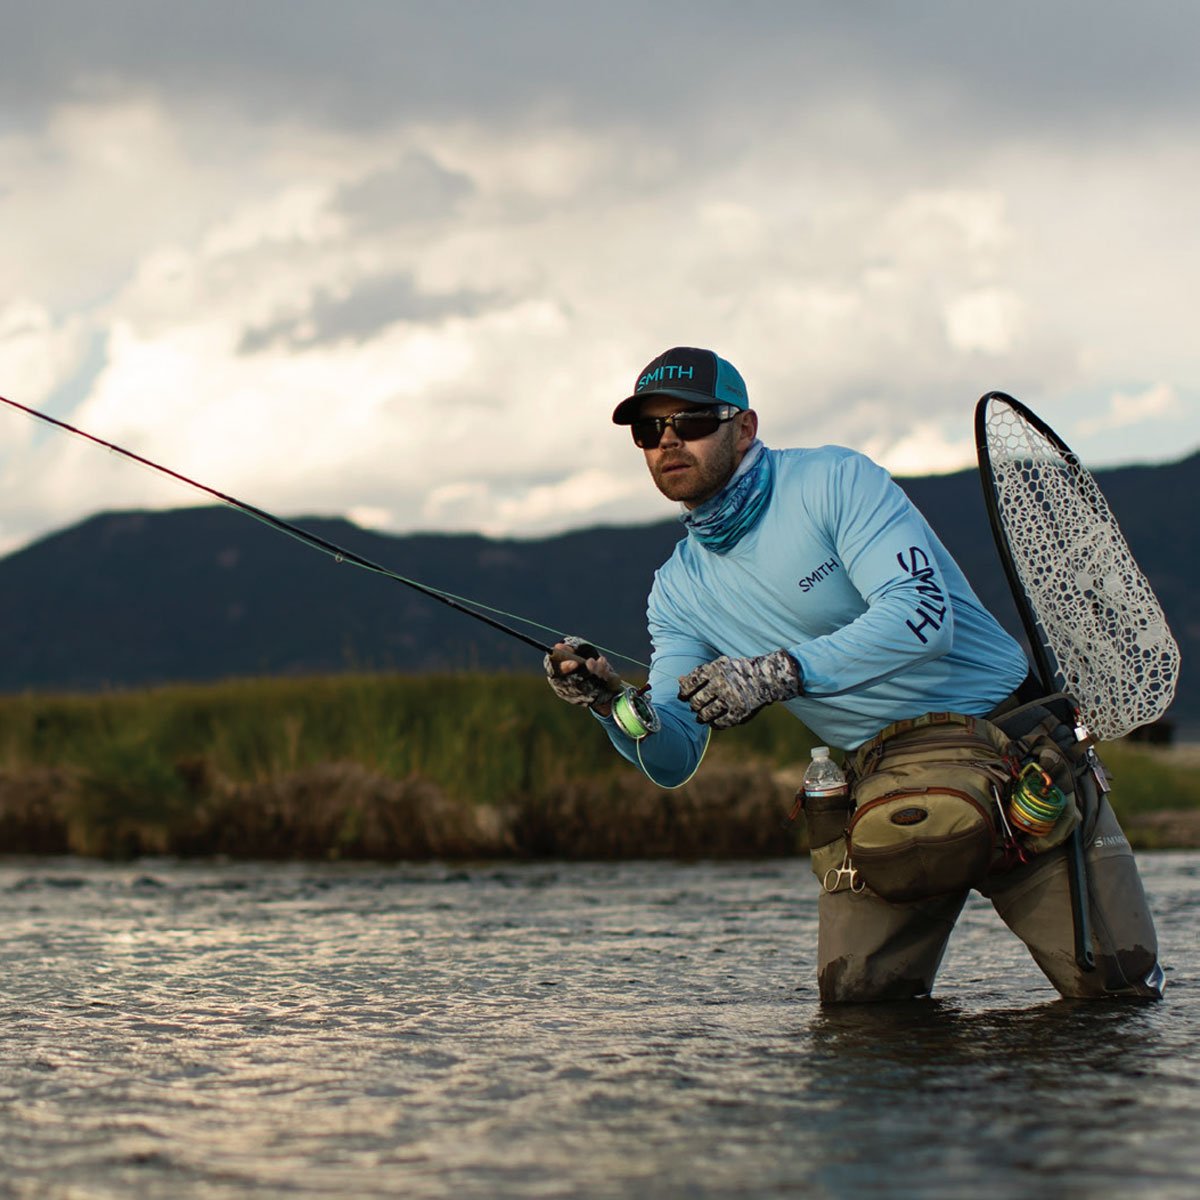 SMITH Fishing Sunglasses Buyer's Guide | SportRx